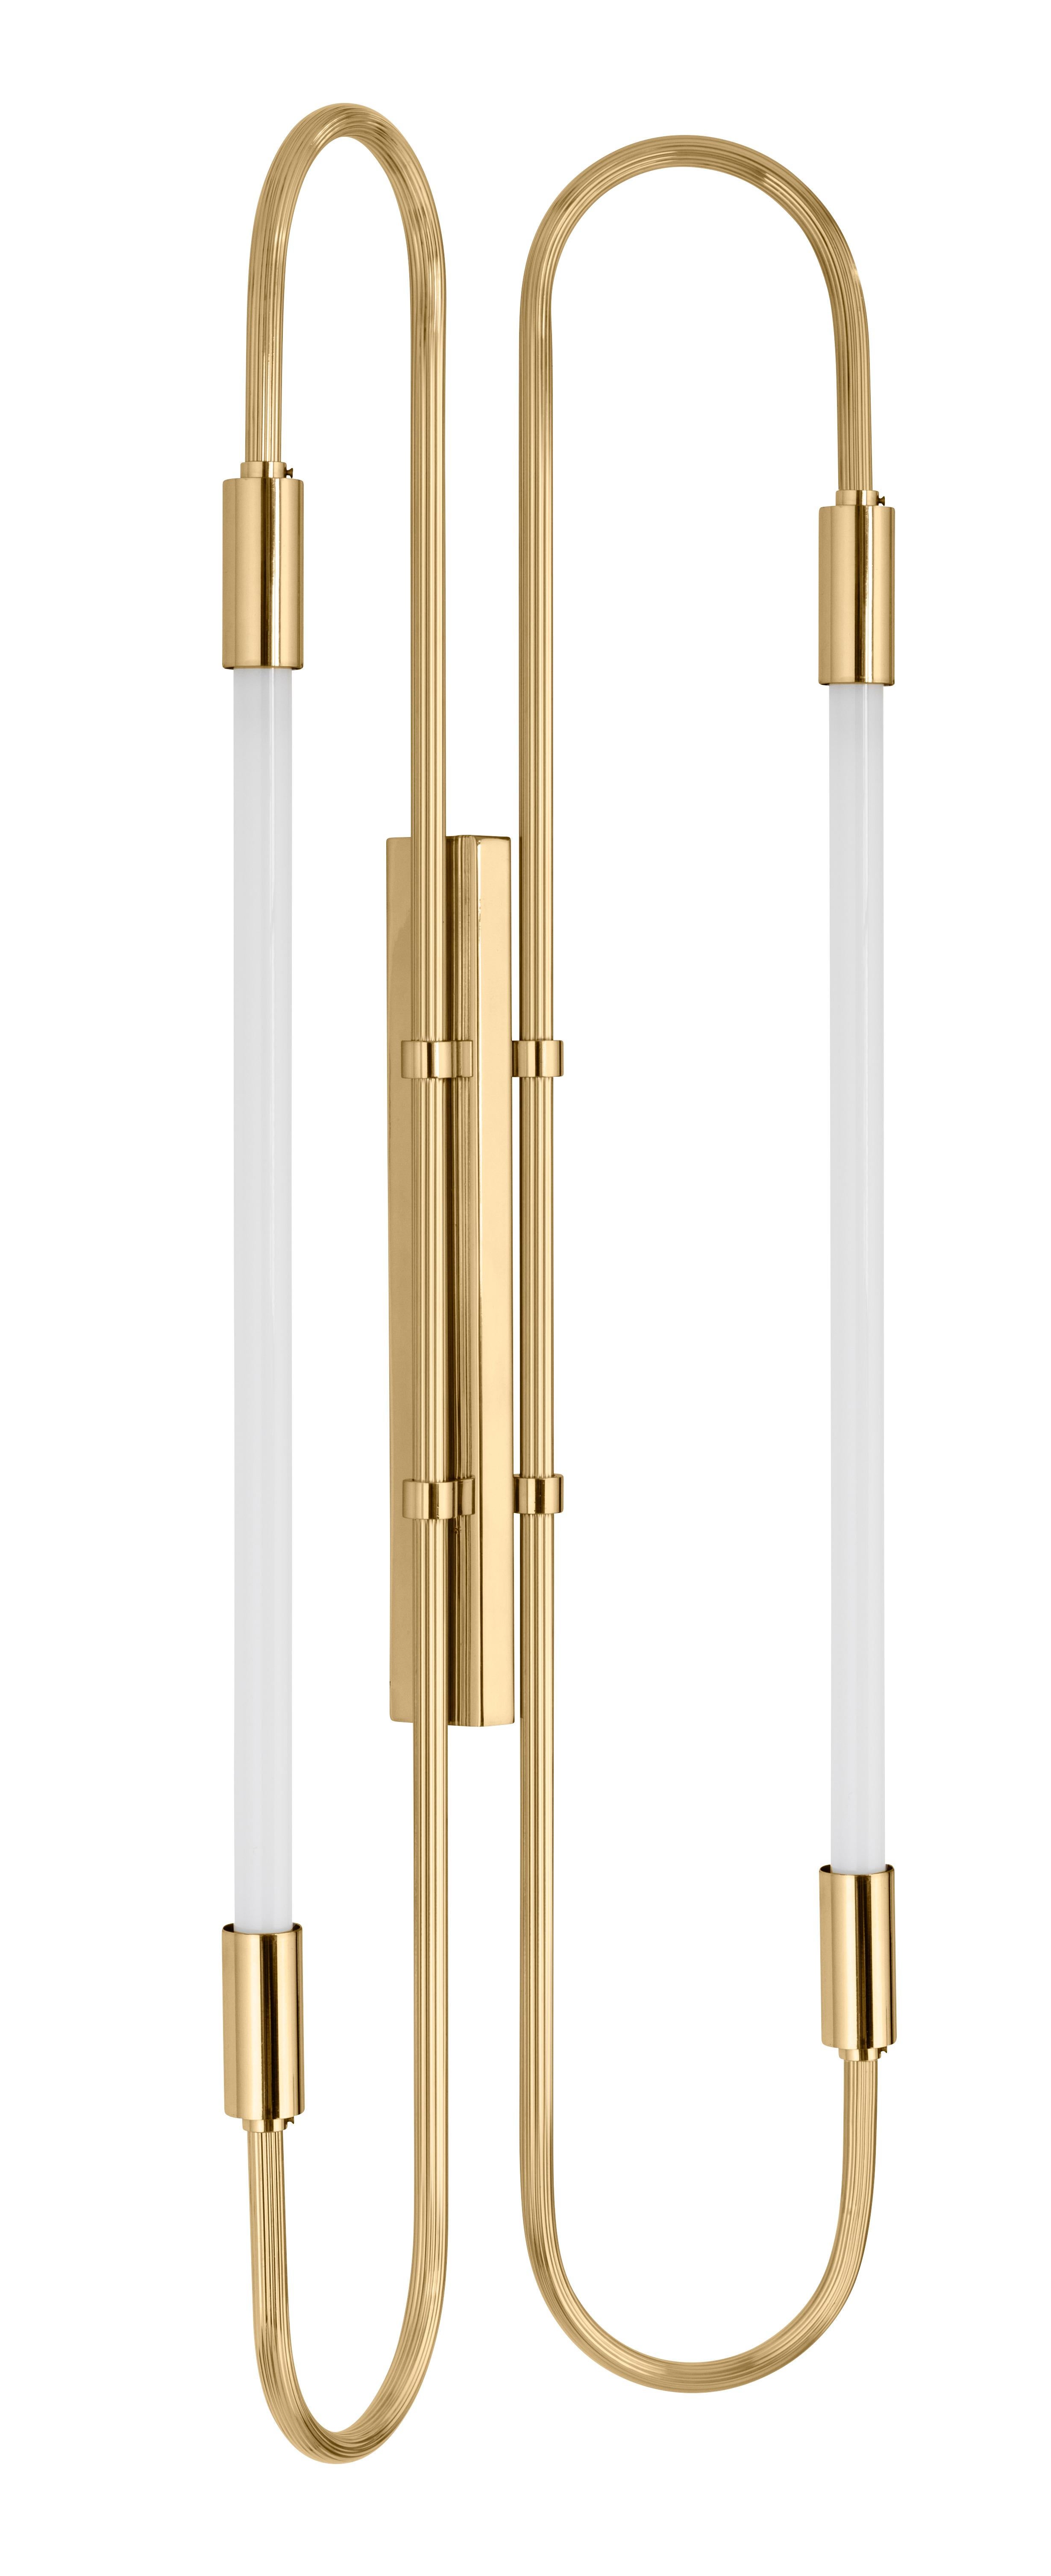 Wall lamp neon double 170 by Magic Circus Editions
Dimensions: H. 170 cm, W. 37 cm, D. 11 cm
Materials: fluted brass tube and glass.
Available finishes: brass (lacquered polished brass, unlacquered polished brass, brushed brass) or nickel